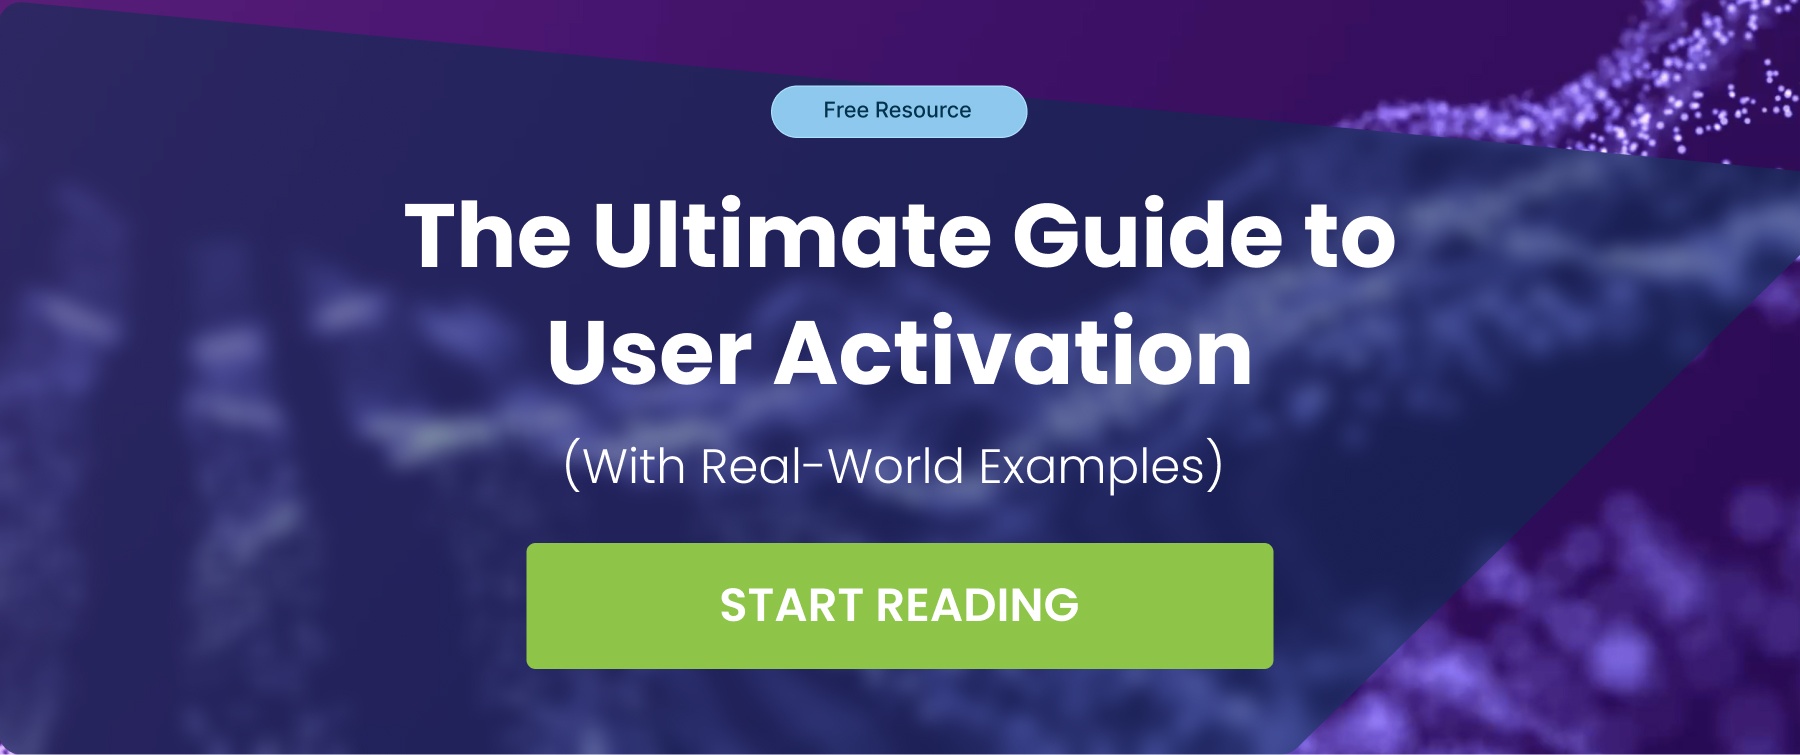 cta-user-activation-the-ultimate-guide